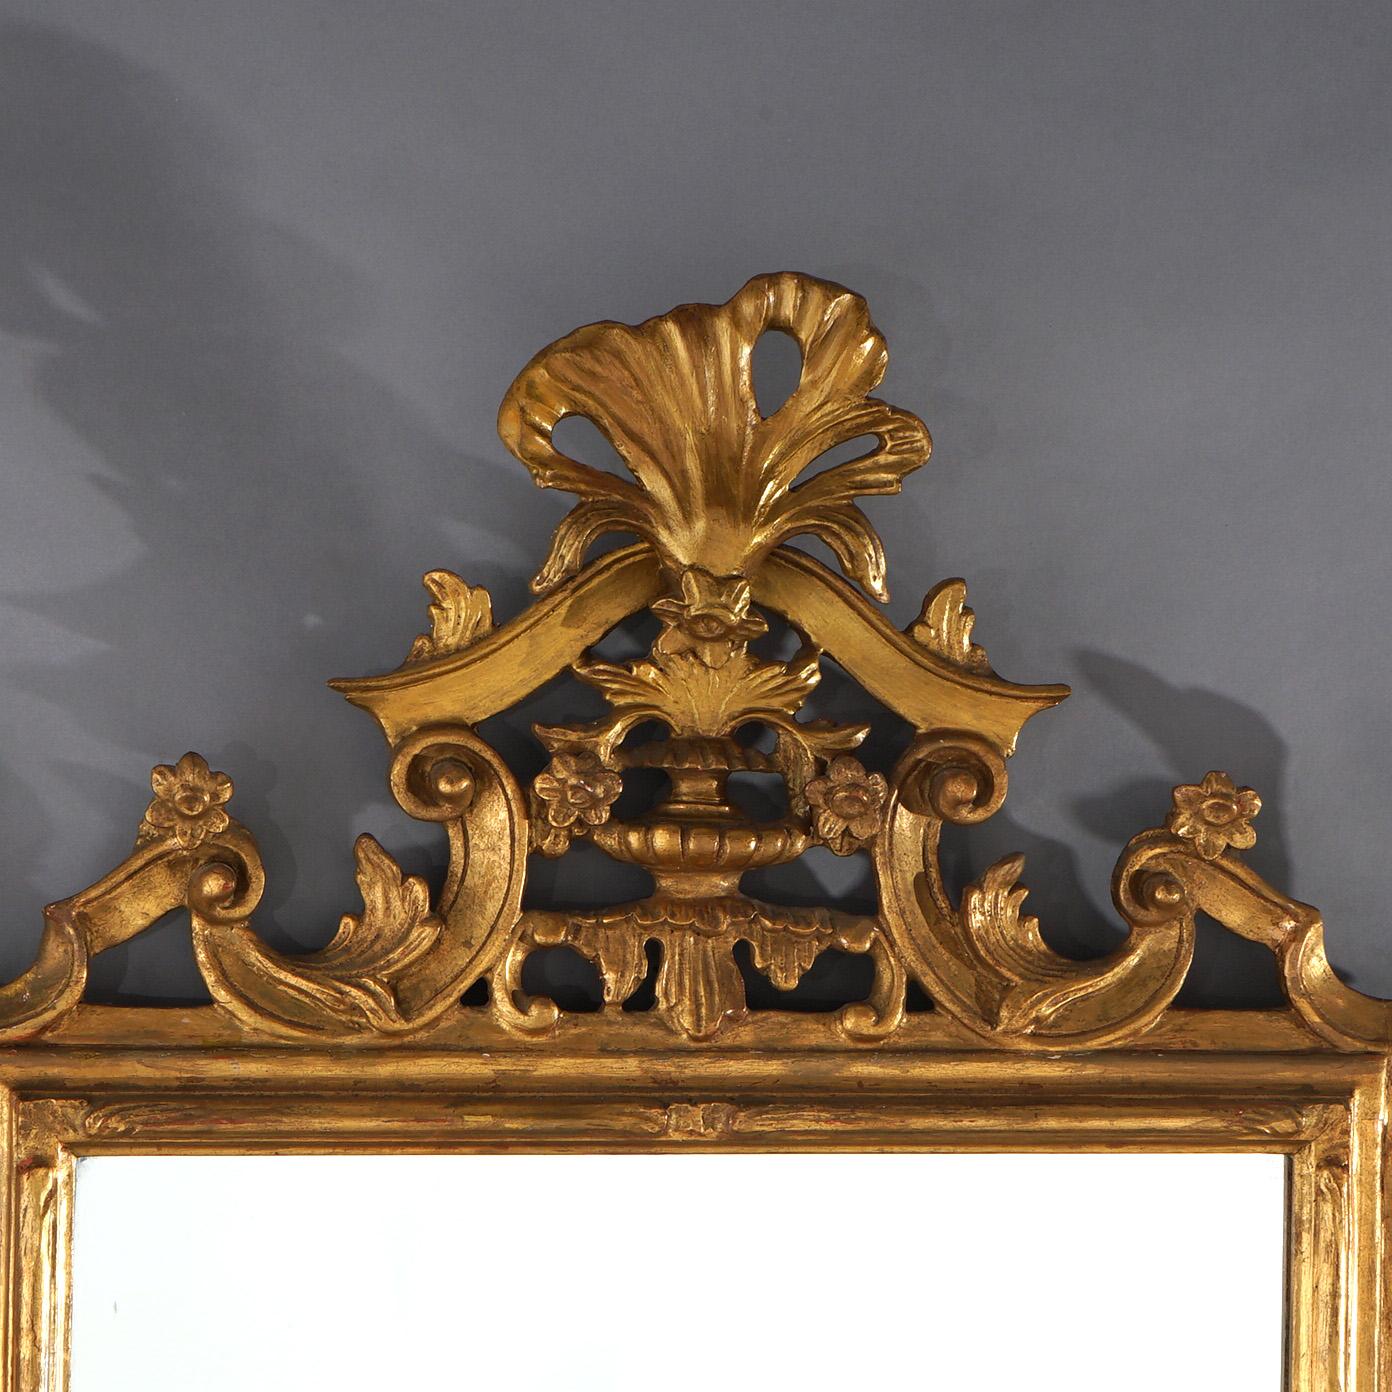 Antique French Louis XIV Style Foliate-Form Giltwood Wall Mirror C1920

Measures - 54.5